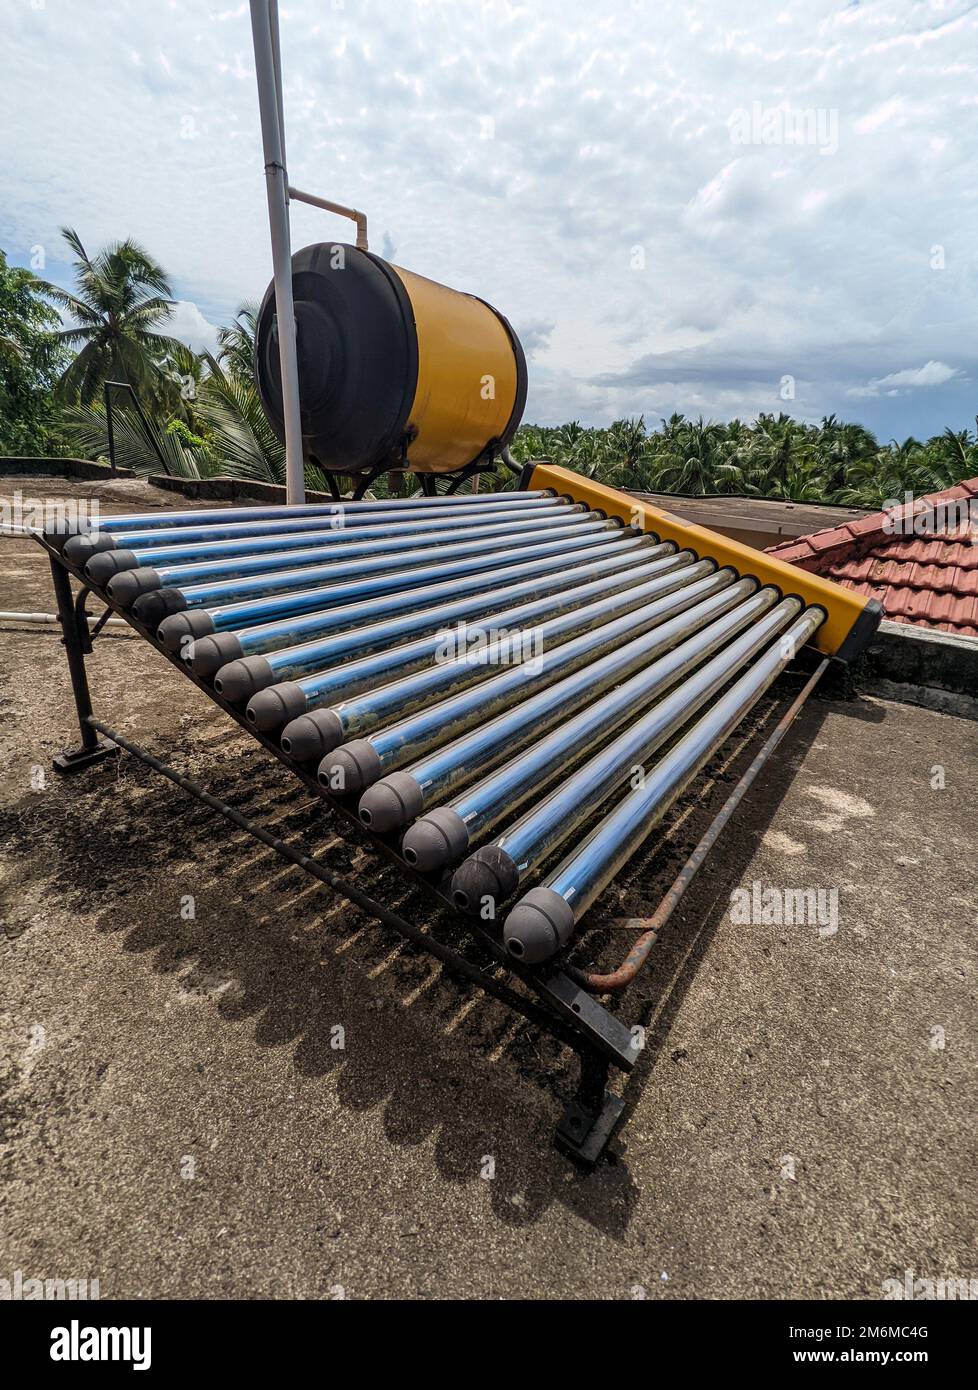 an eco friendly solar water heater and tank installed on the roof of a building for generating hot water renewably Stock Photo